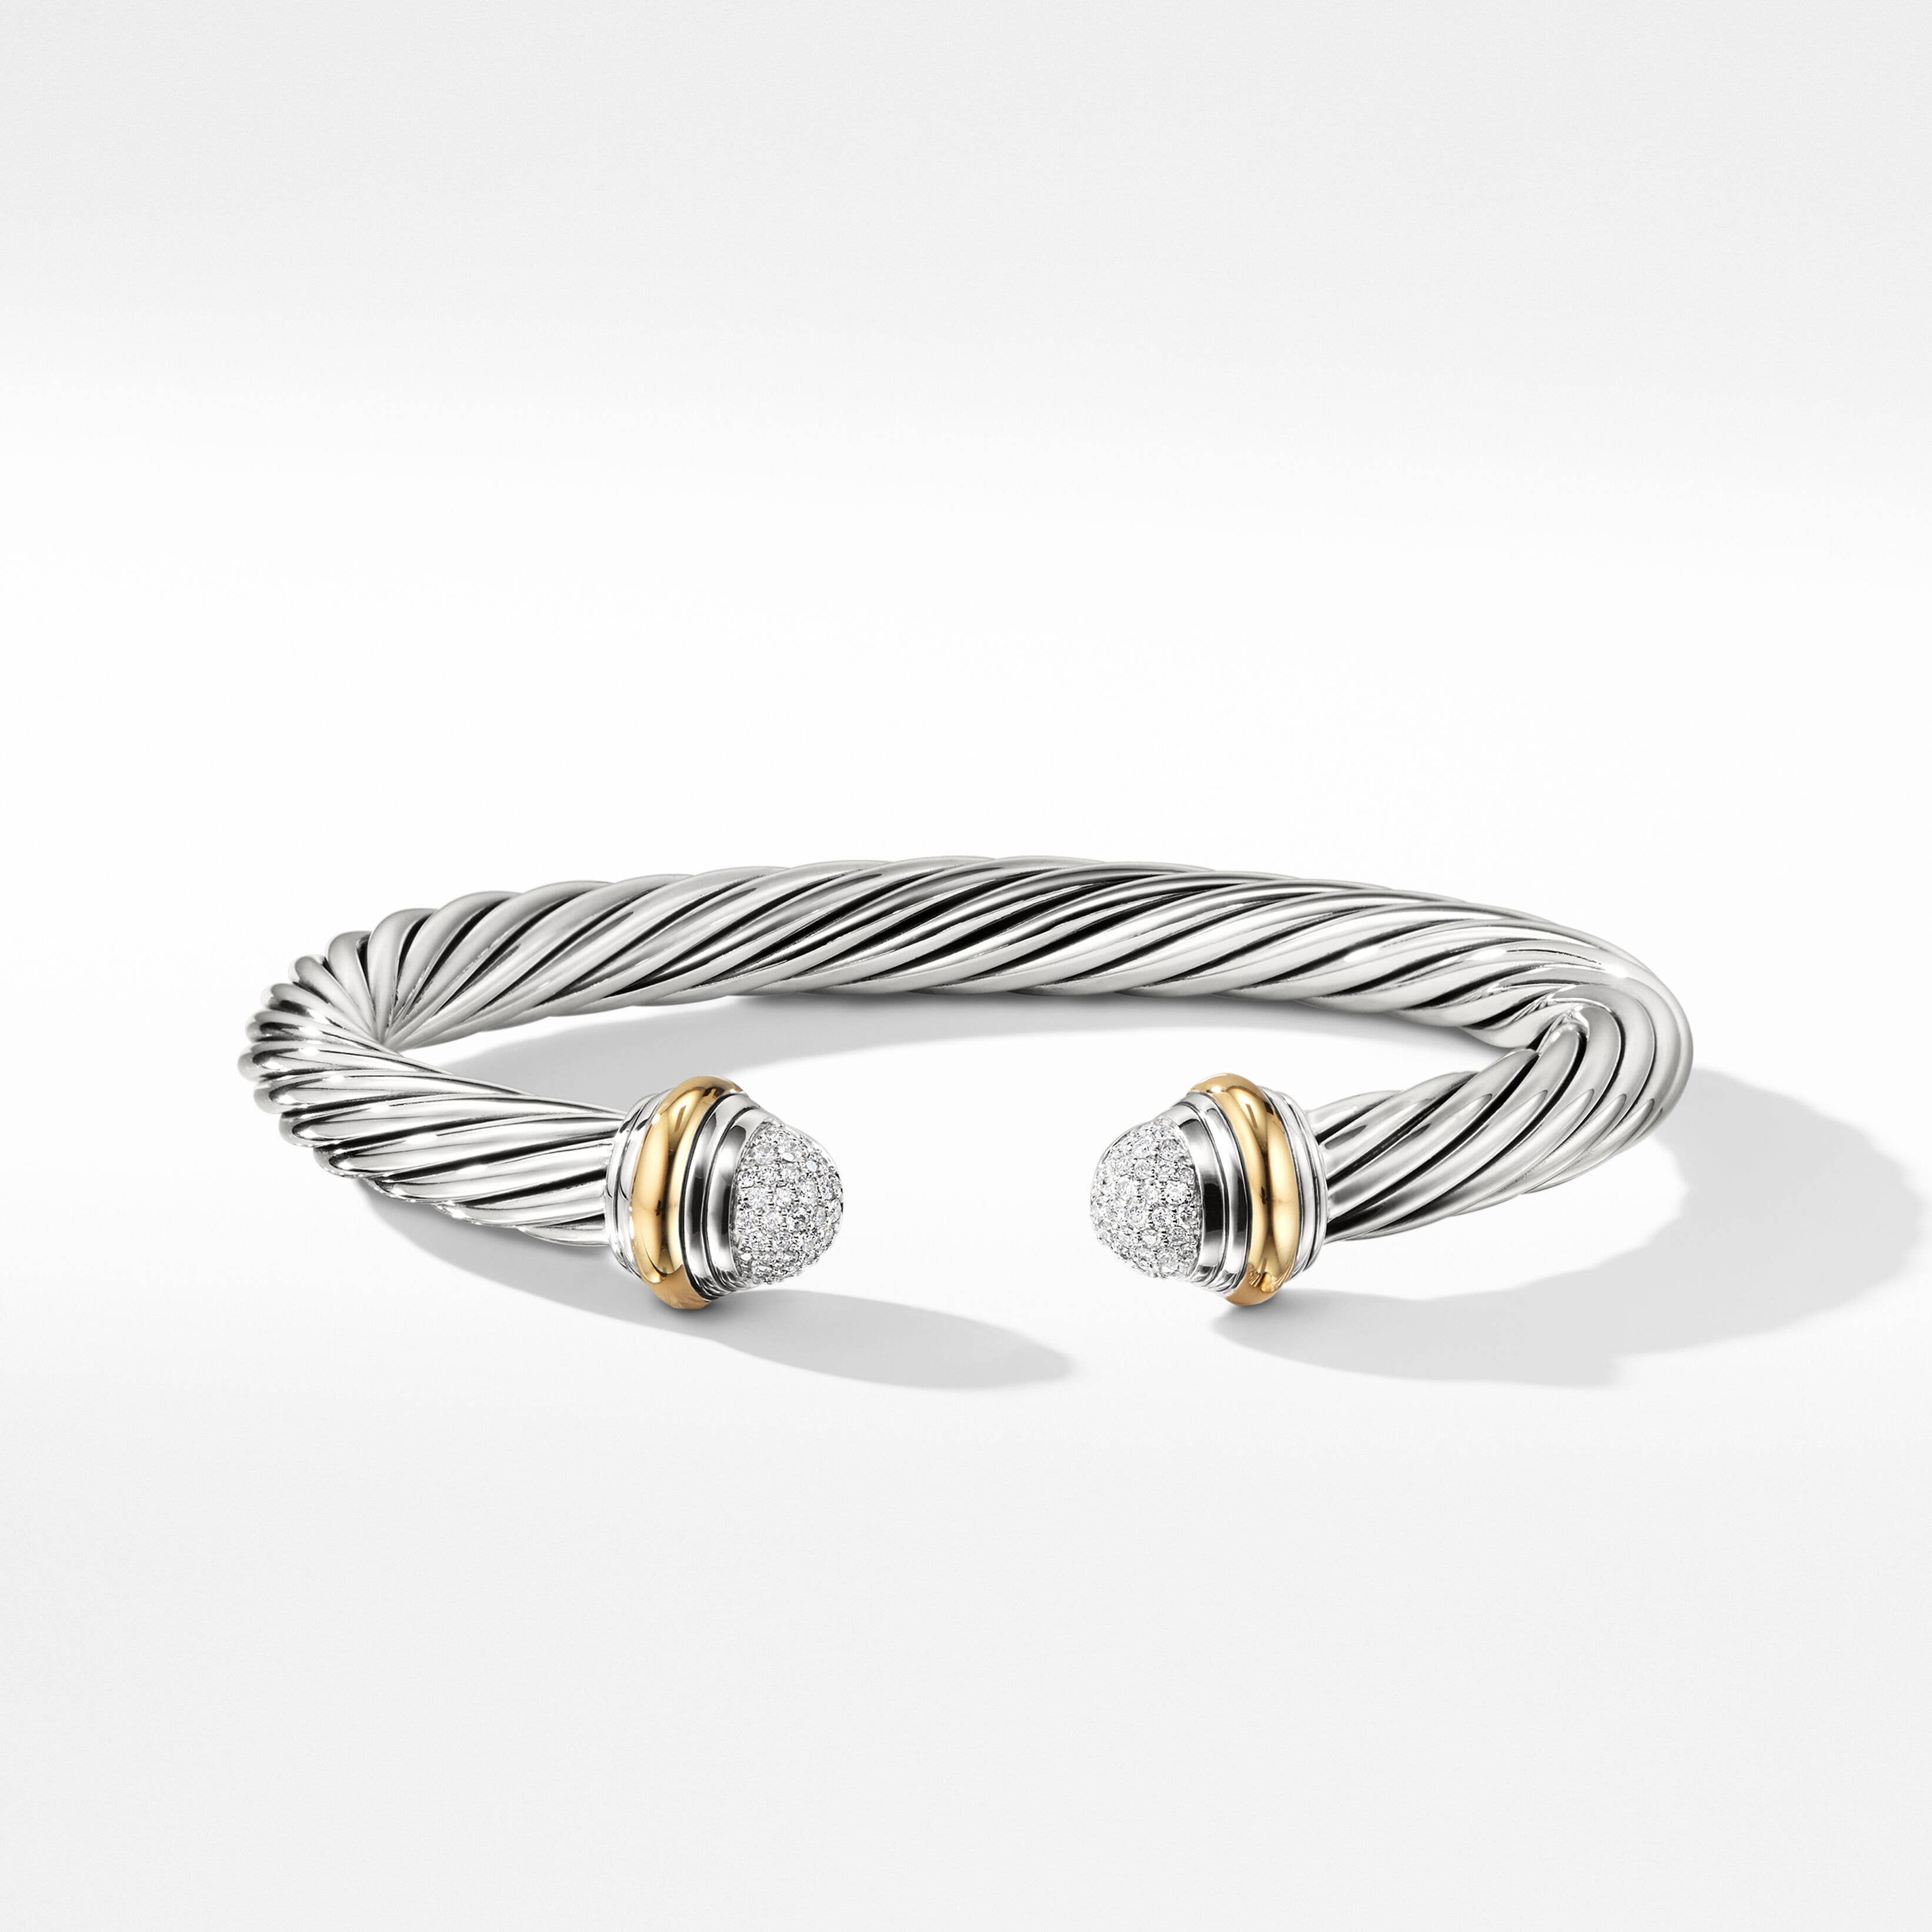 Cable Classics Bracelet with Pavé Diamond Domes and 18K Yellow Gold